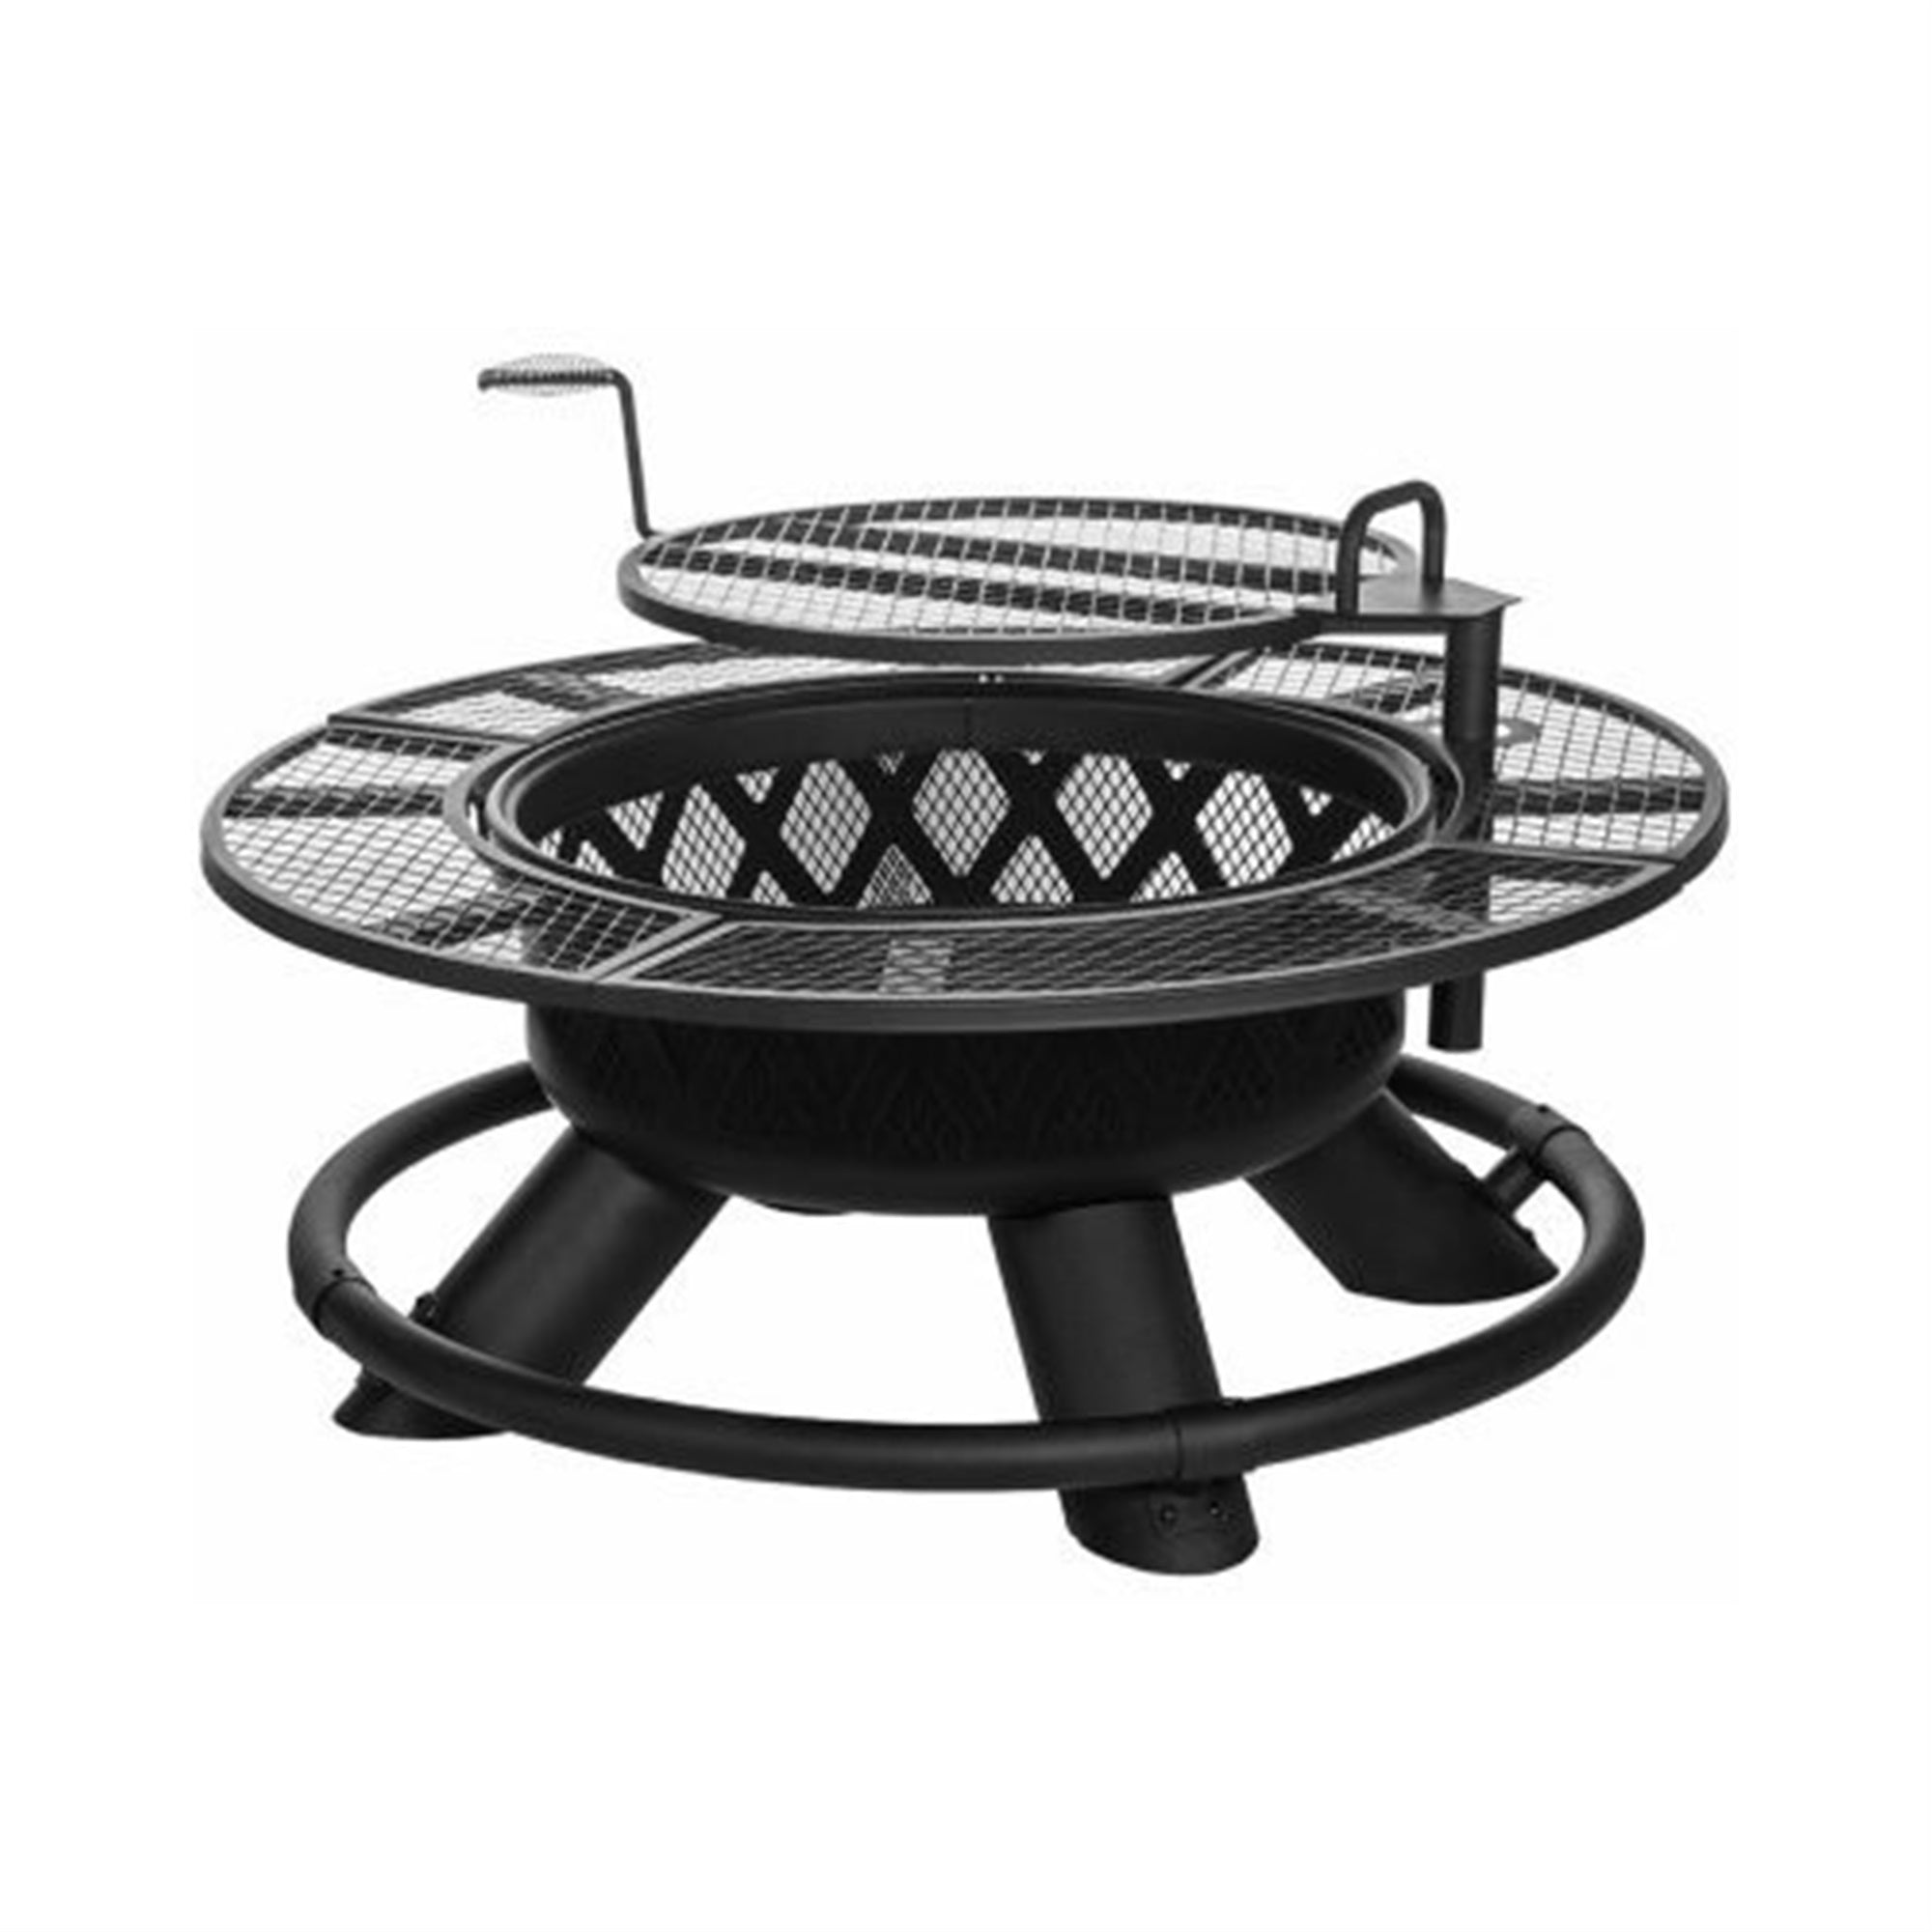 Shinerich Industrial Outdoor Metal Ranch Fire Pit With Grill, Black, 47"